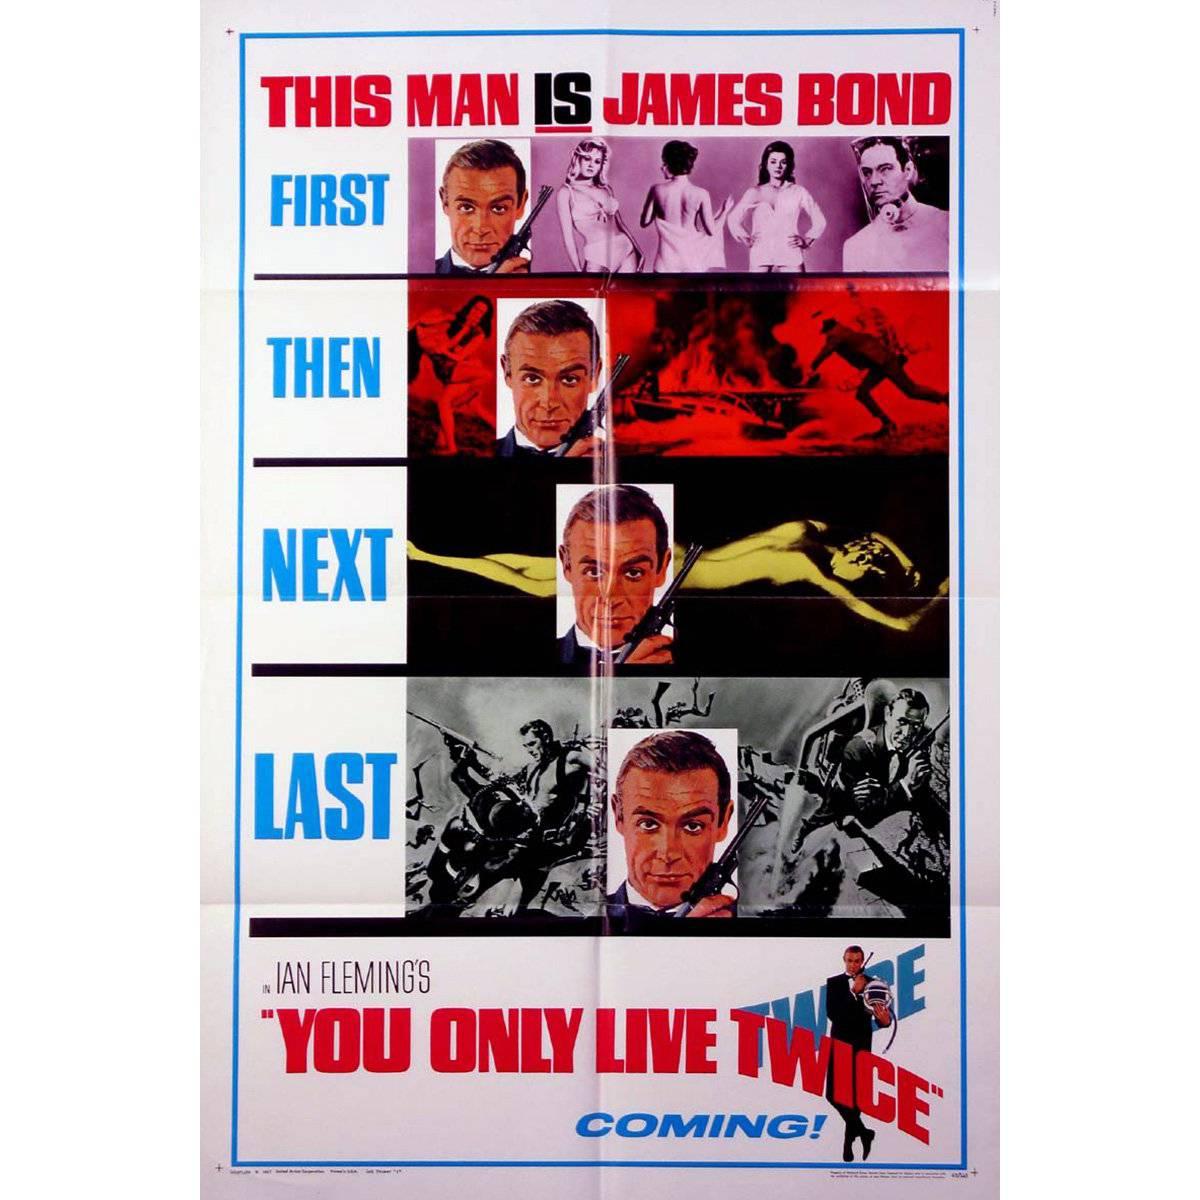 "You Only Live Twice" Film Poster, 1967